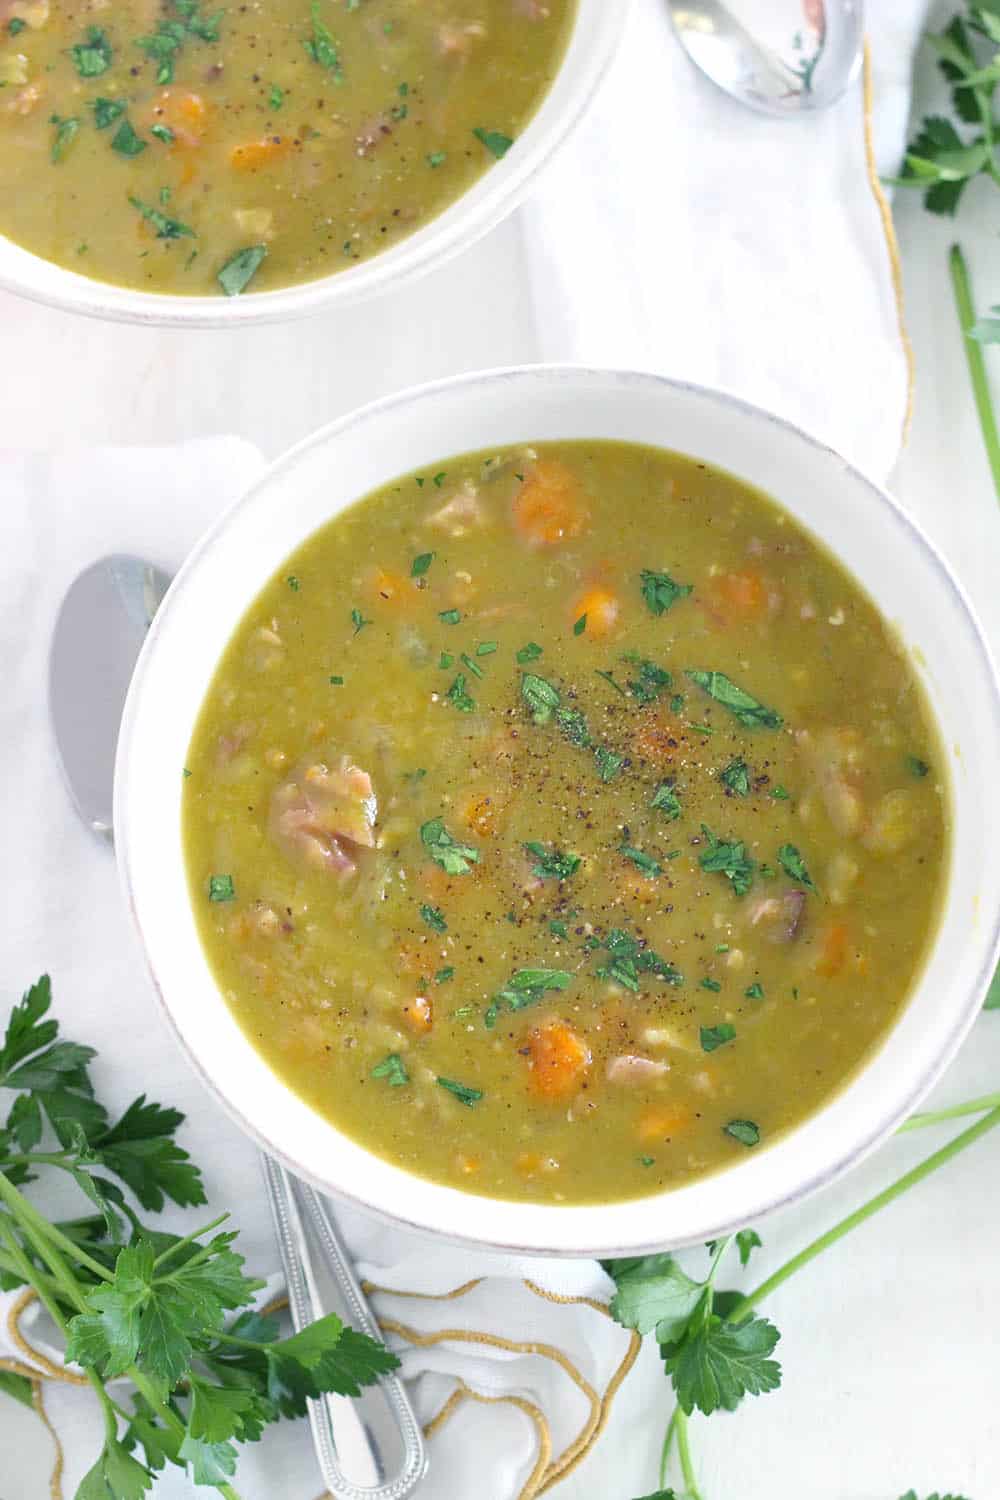 This Instant Pot Split Pea Soup is made with a leftover ham bone (or any ham you have), for a super easy, freezable weeknight meal! The pressure cooker cuts the cooking time in half. #InstantPot #splitpeasoup #PressureCooker